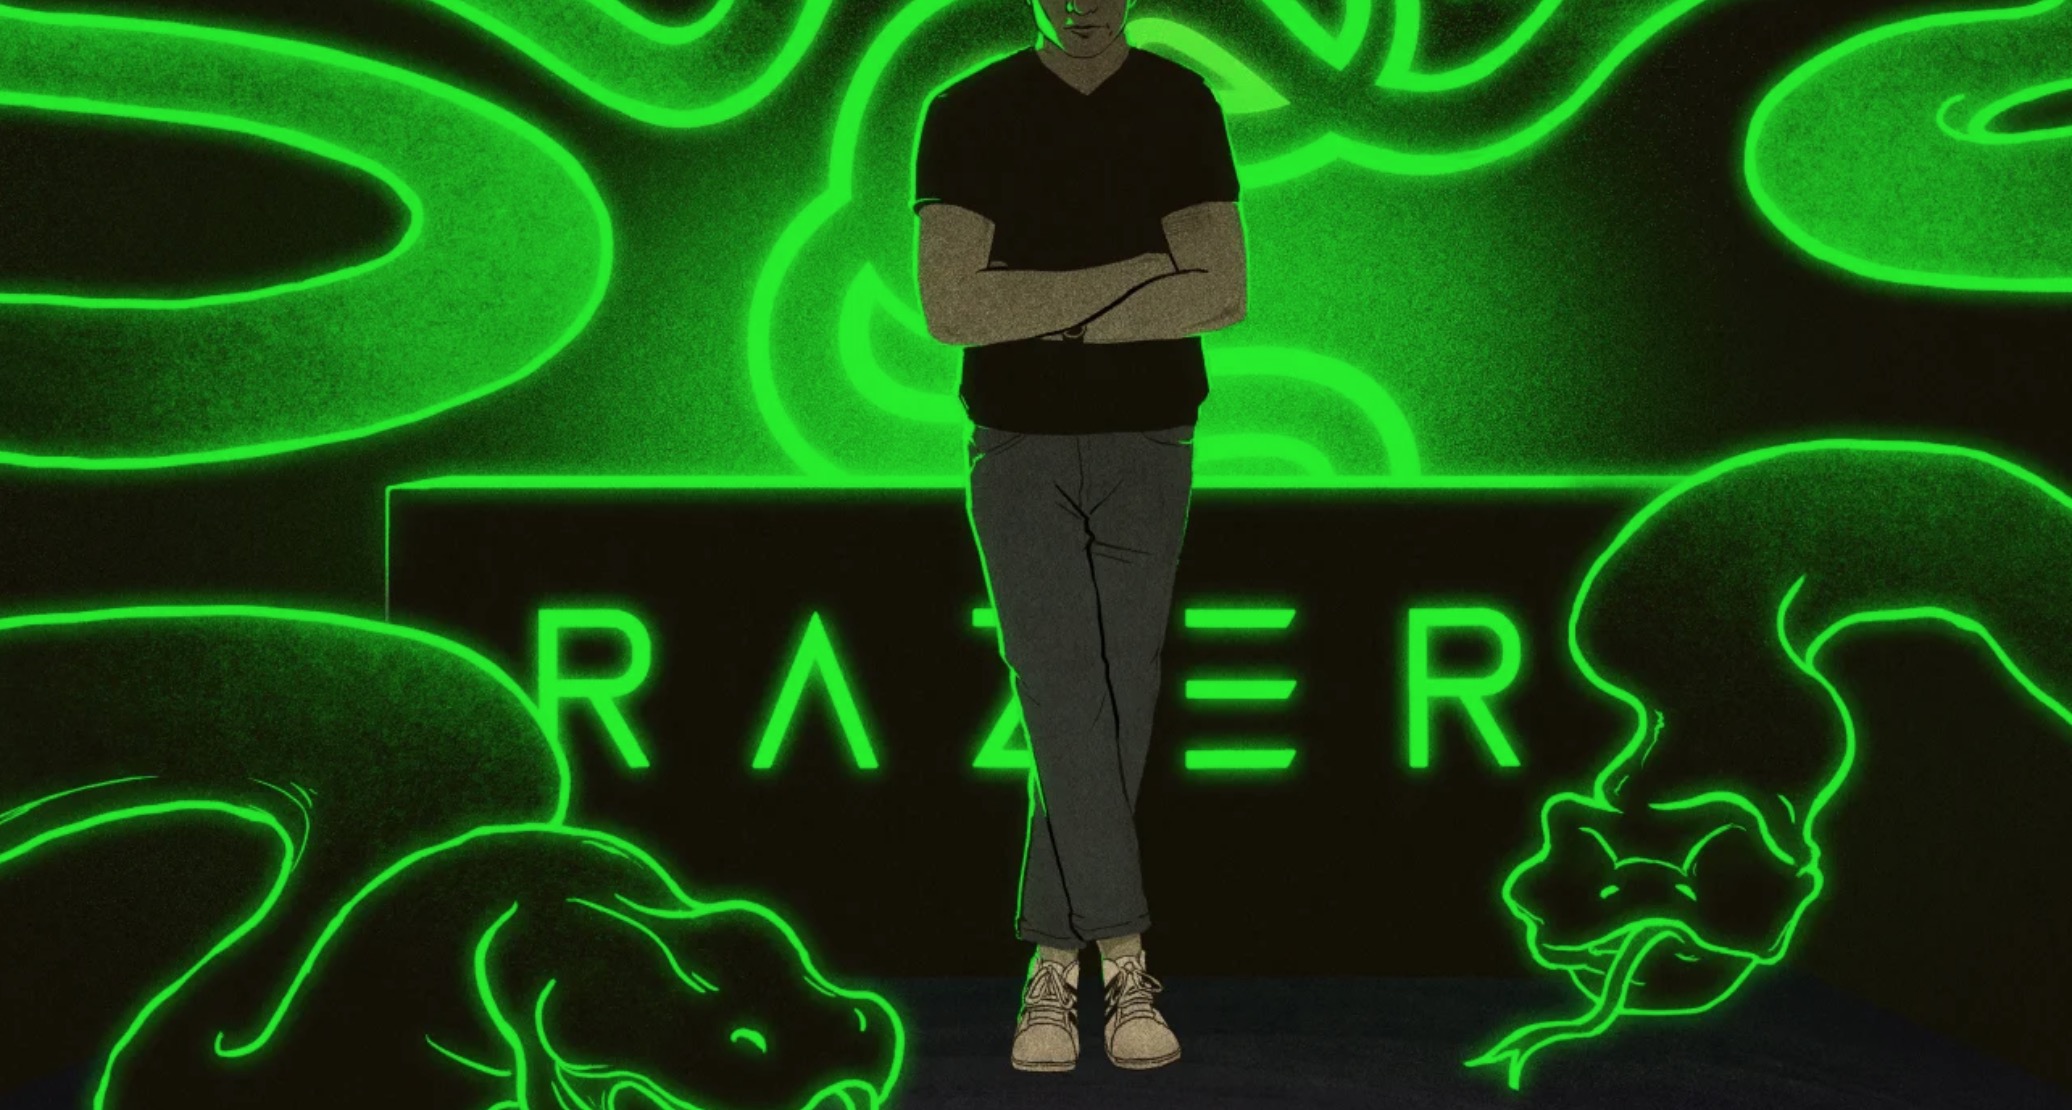 Razer CEO Berated And Threatened His Staff, Former Employees Say